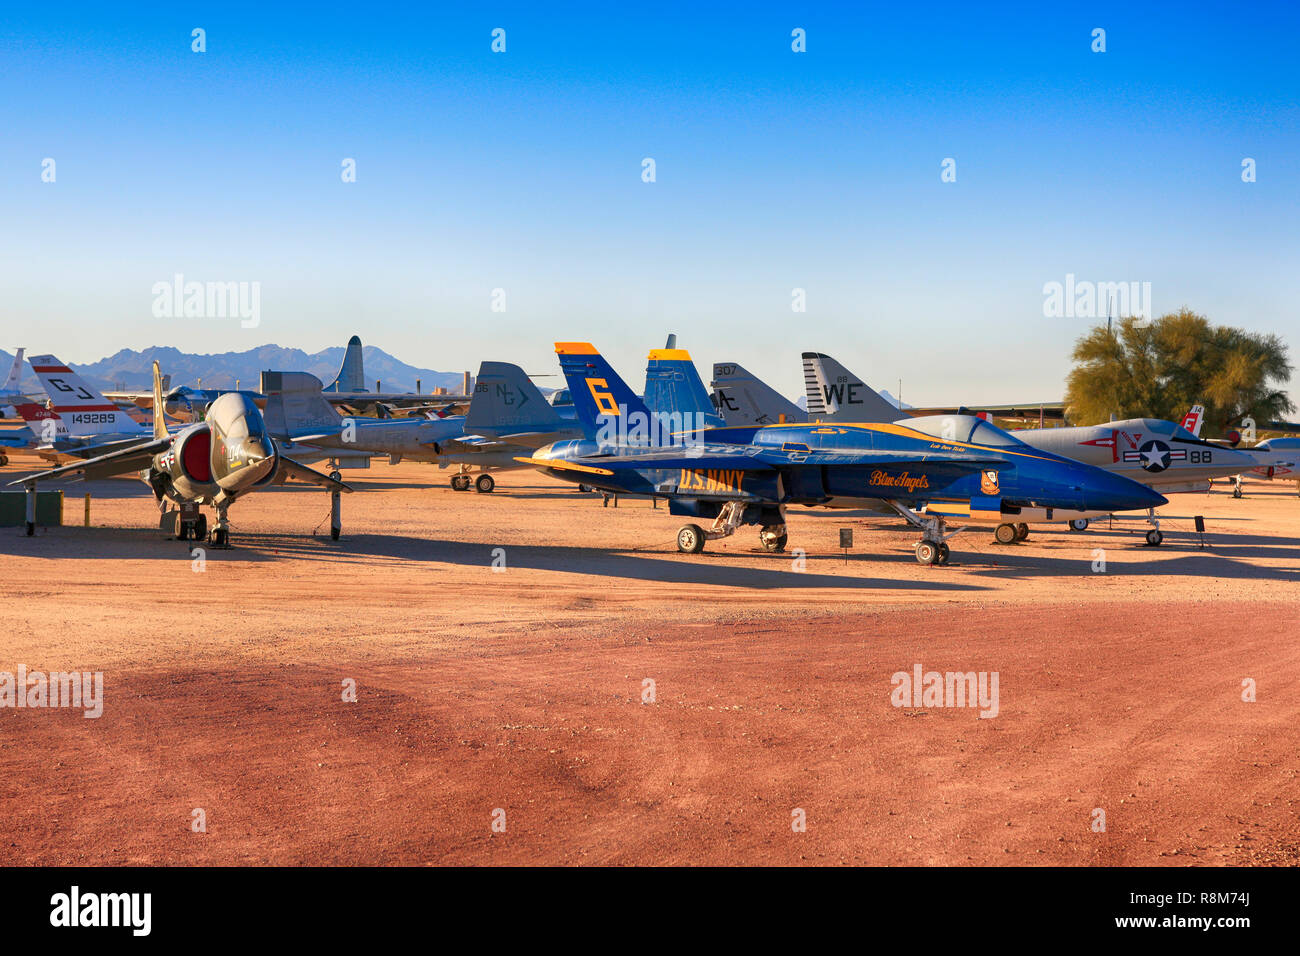 Collection of 1970-80s world jet fighter planes on display at the Pima Air & Space Museum in Tucson, AZ Stock Photo